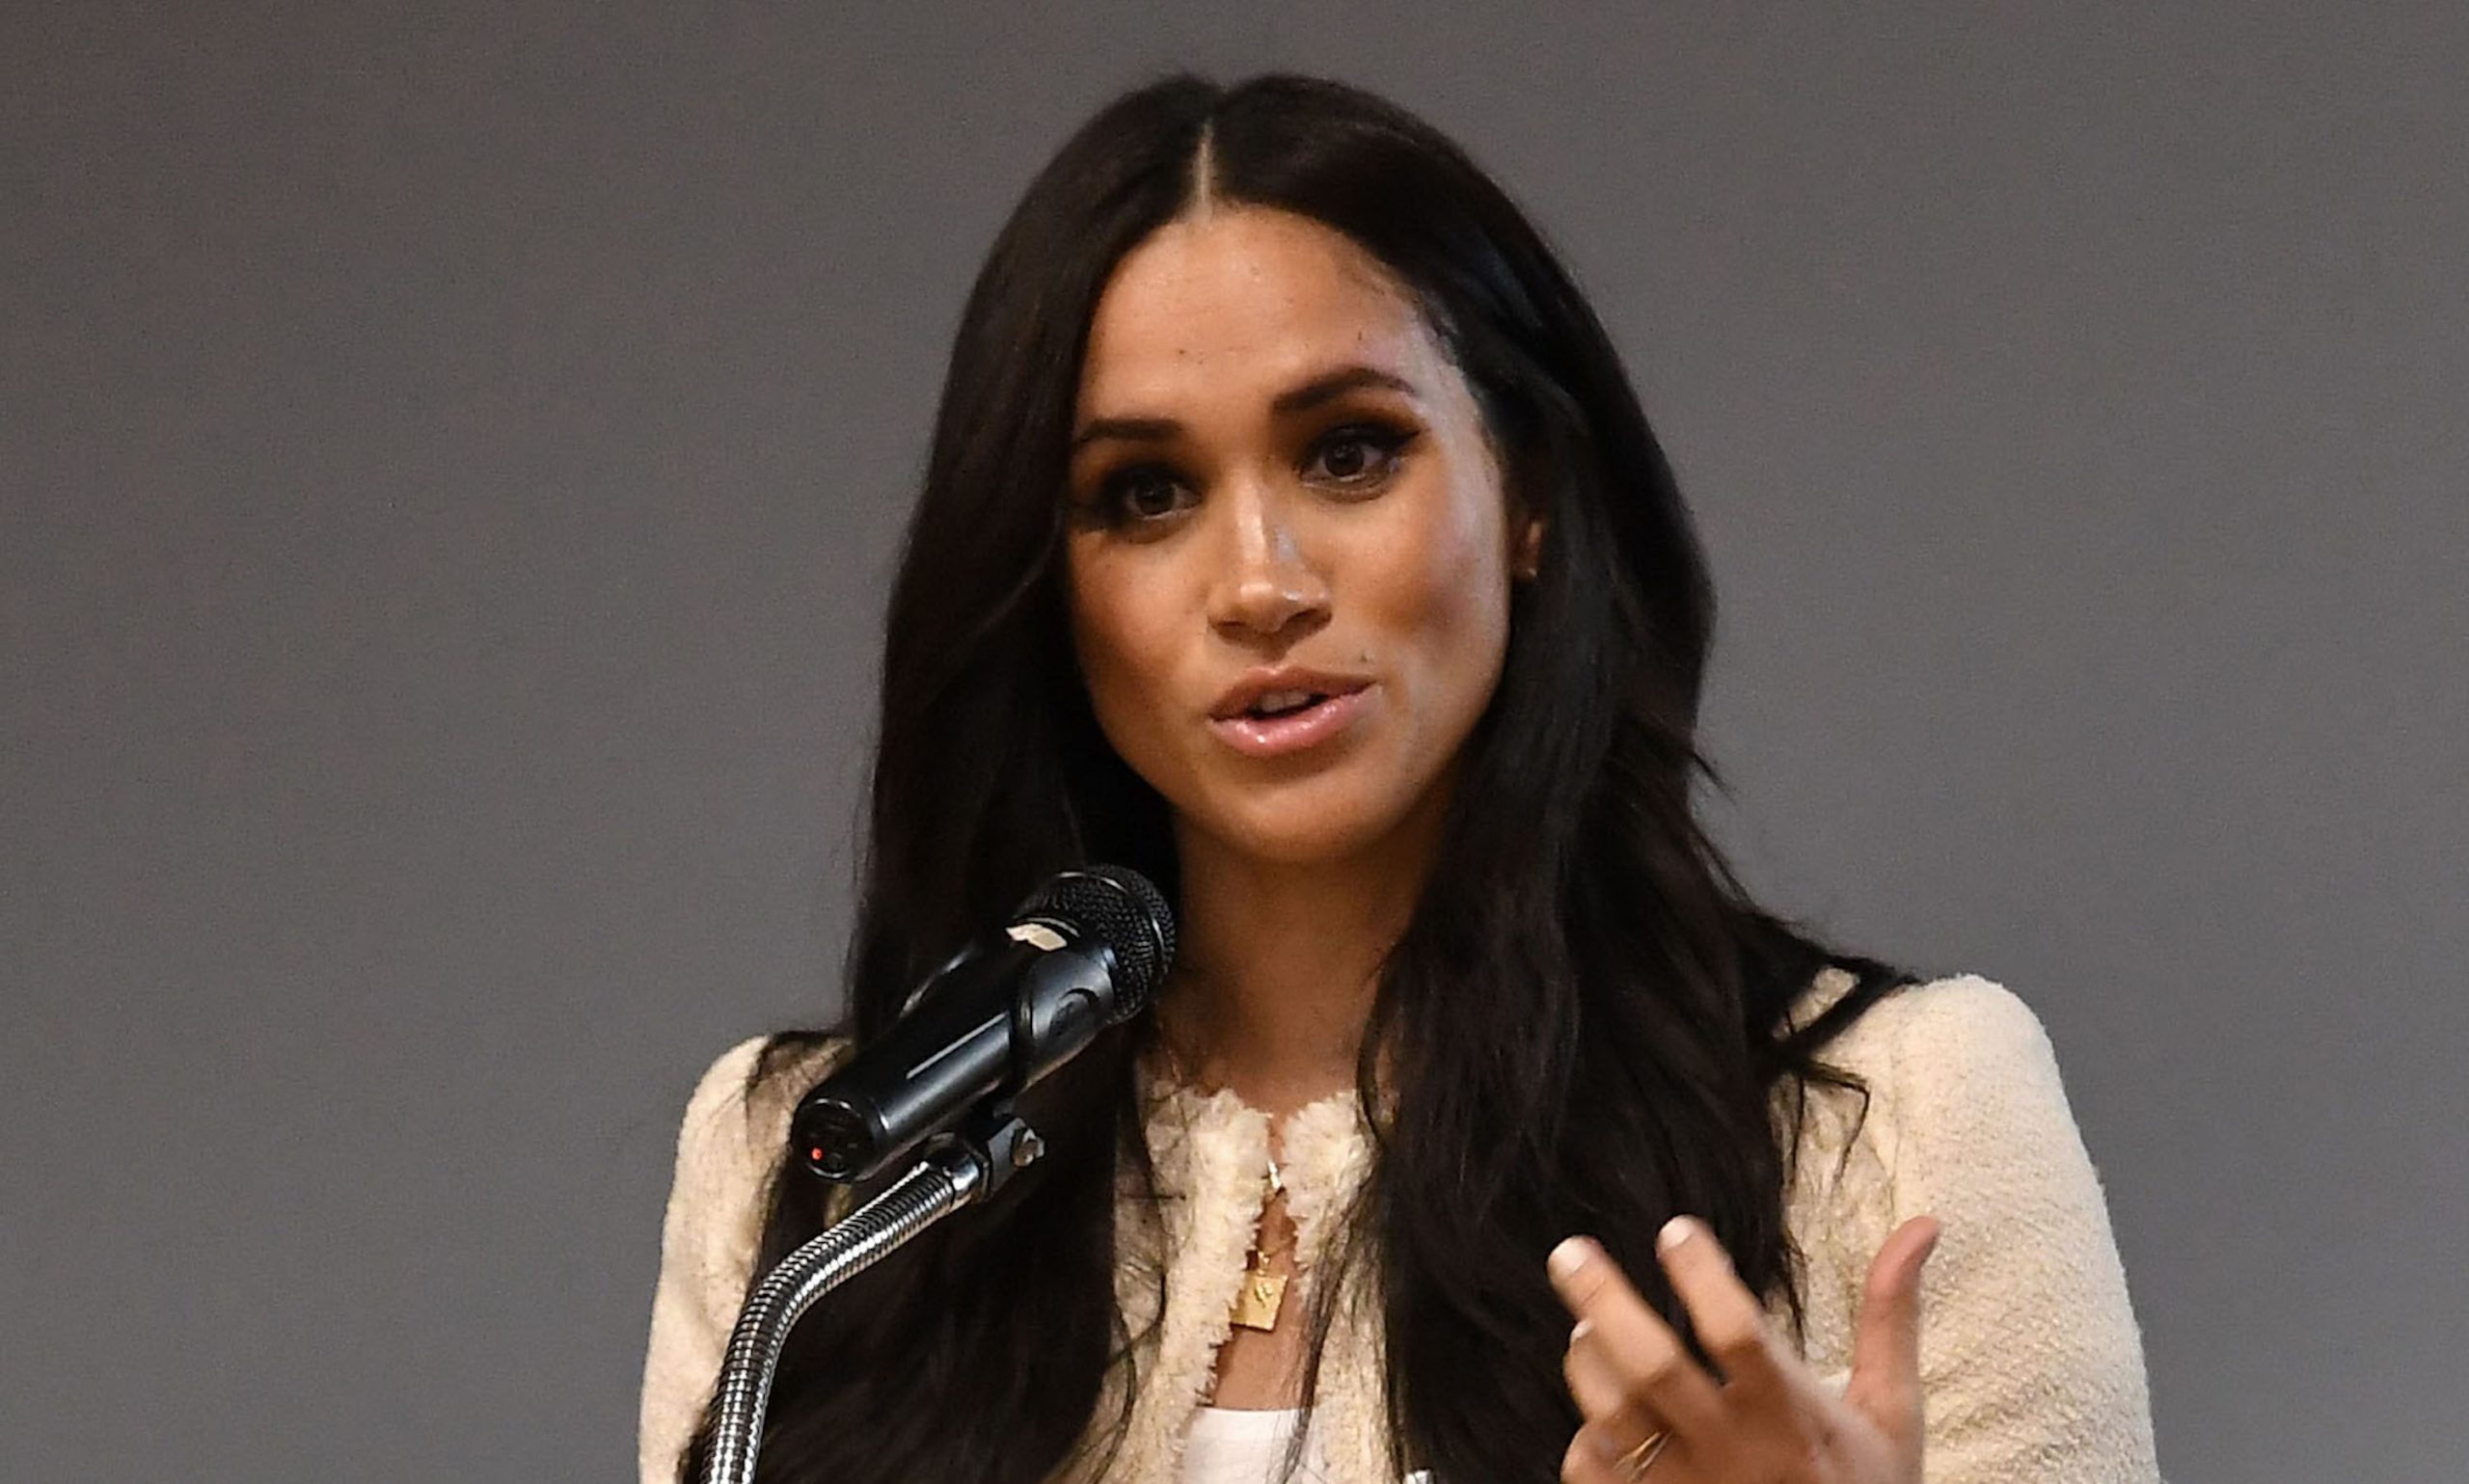 Meghan Markle Wears Low Ponytail to Smart Works Video Conference